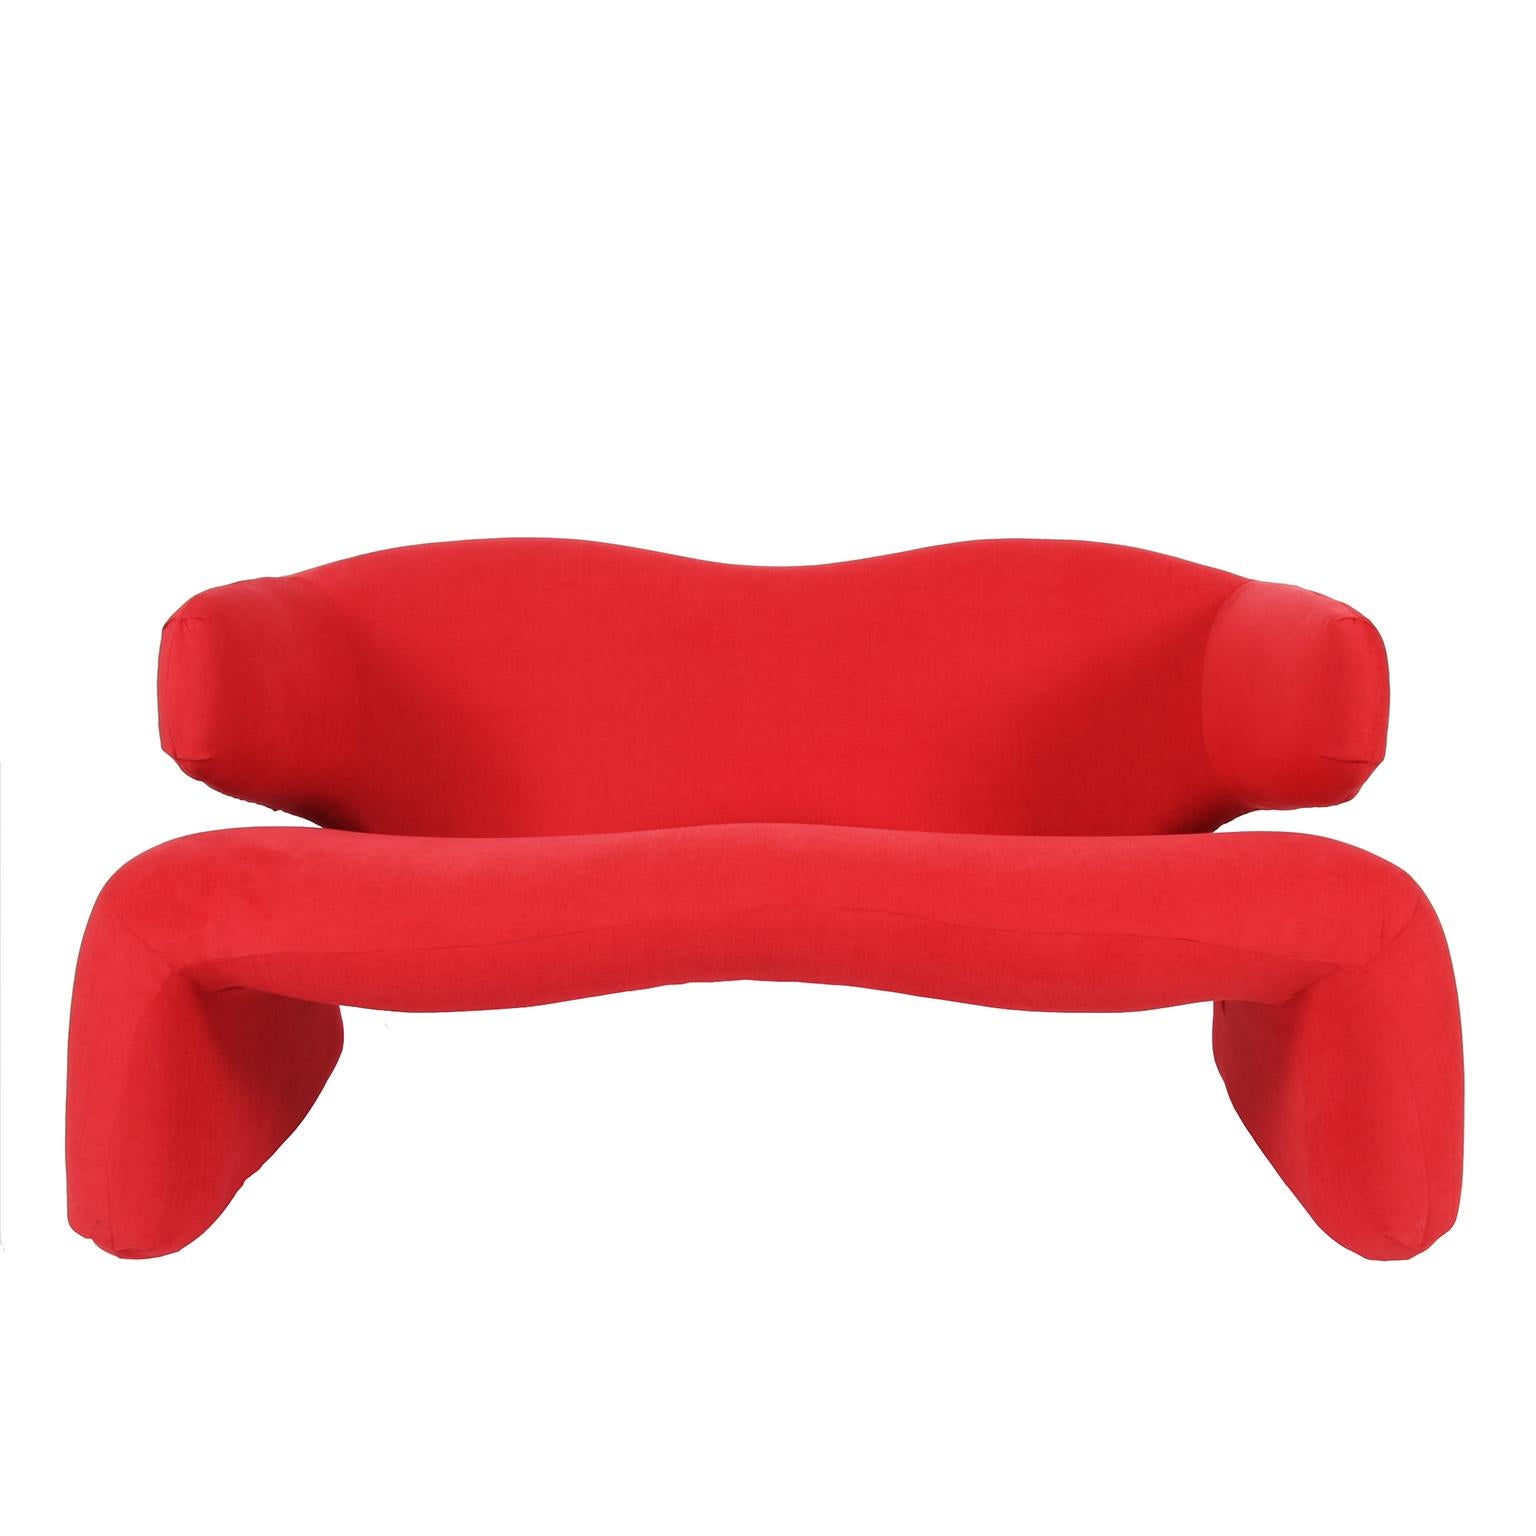 French Red Djinn Sofa by Olivier Mourgue, 1965